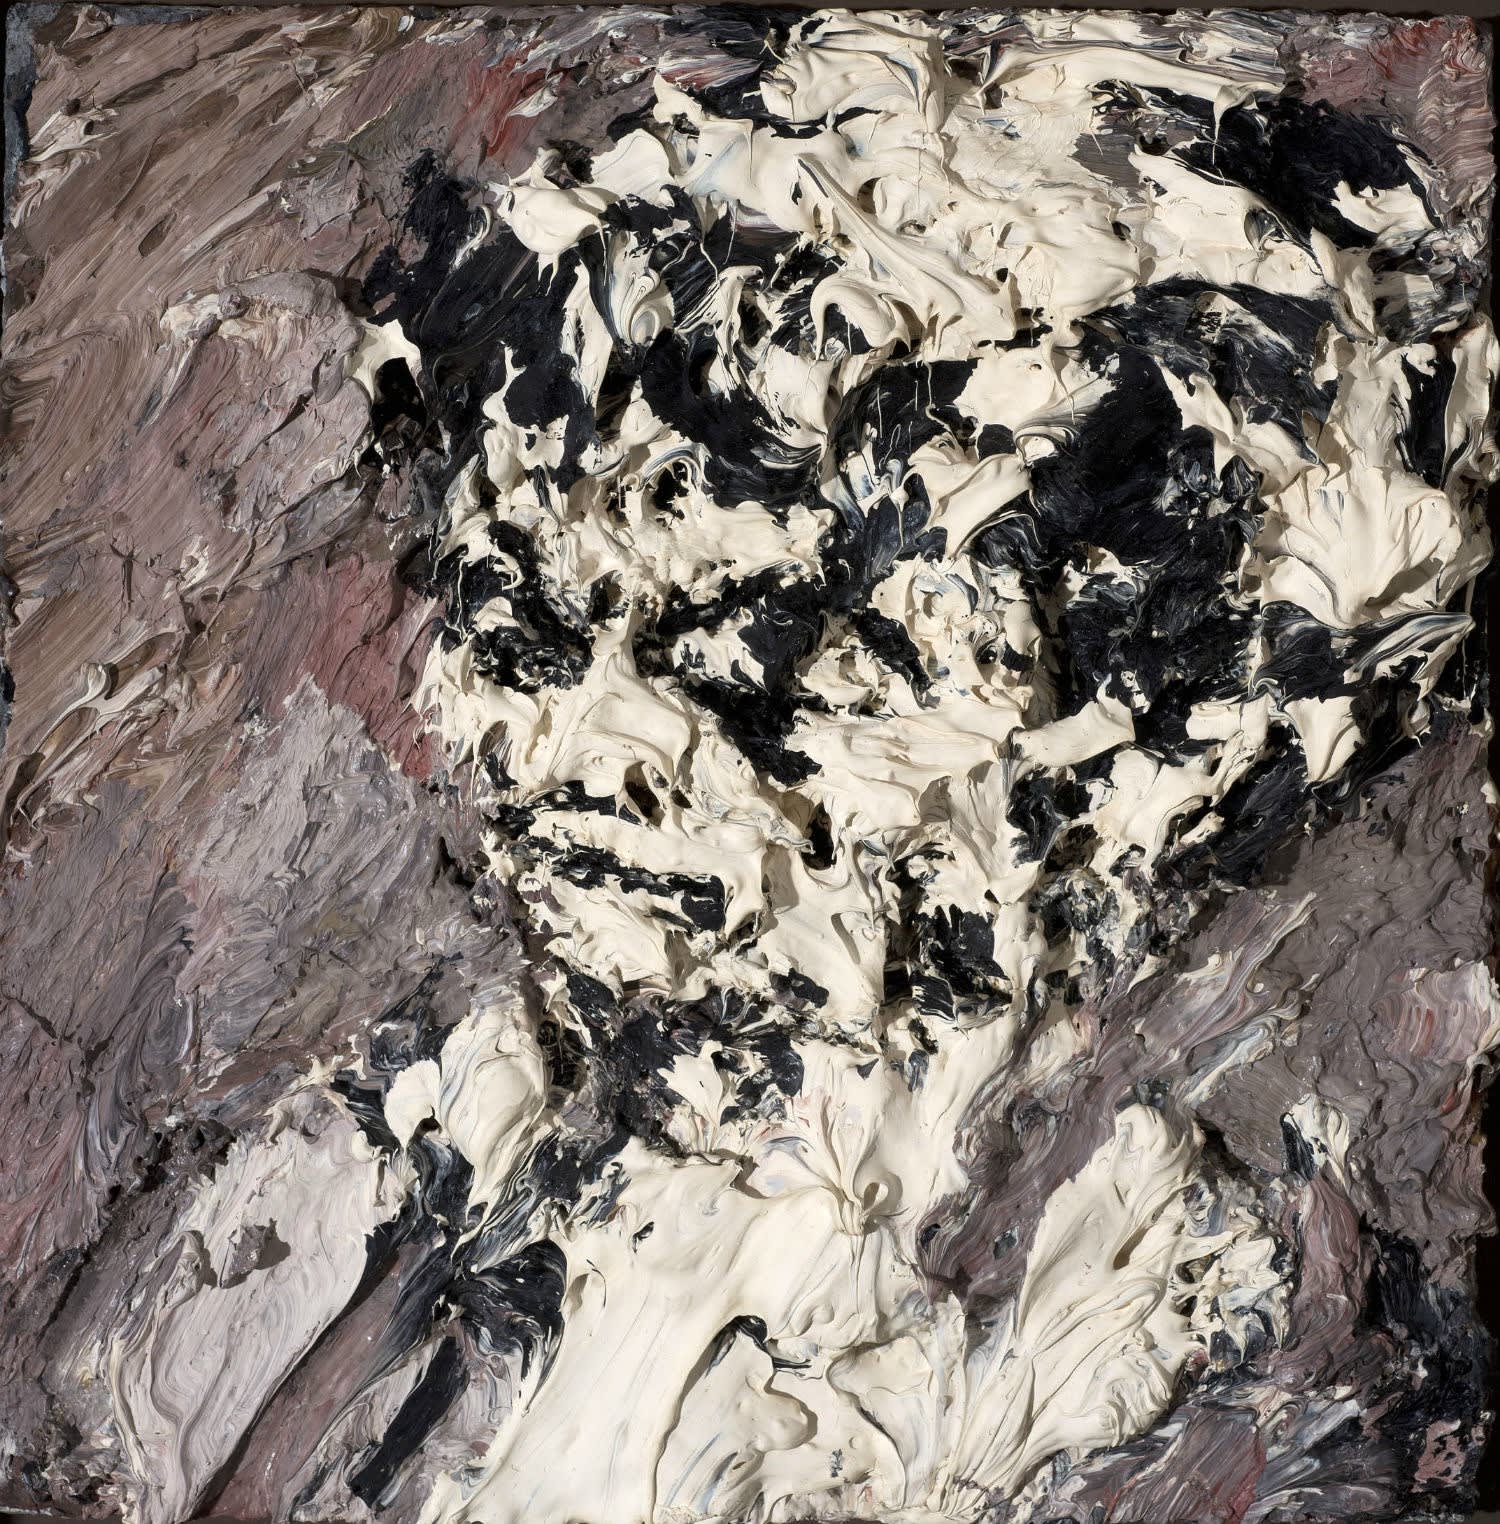 Frank Auerbach (1931-) Head of Helen Gillespie c. 1962-64 Oil on board 29.2 x 29.2 cm On loan to the Ben Uri Collection until 2022 © Frank Auerbach, courtesy Marlborough Fine Art To see and discover more about this artist click here